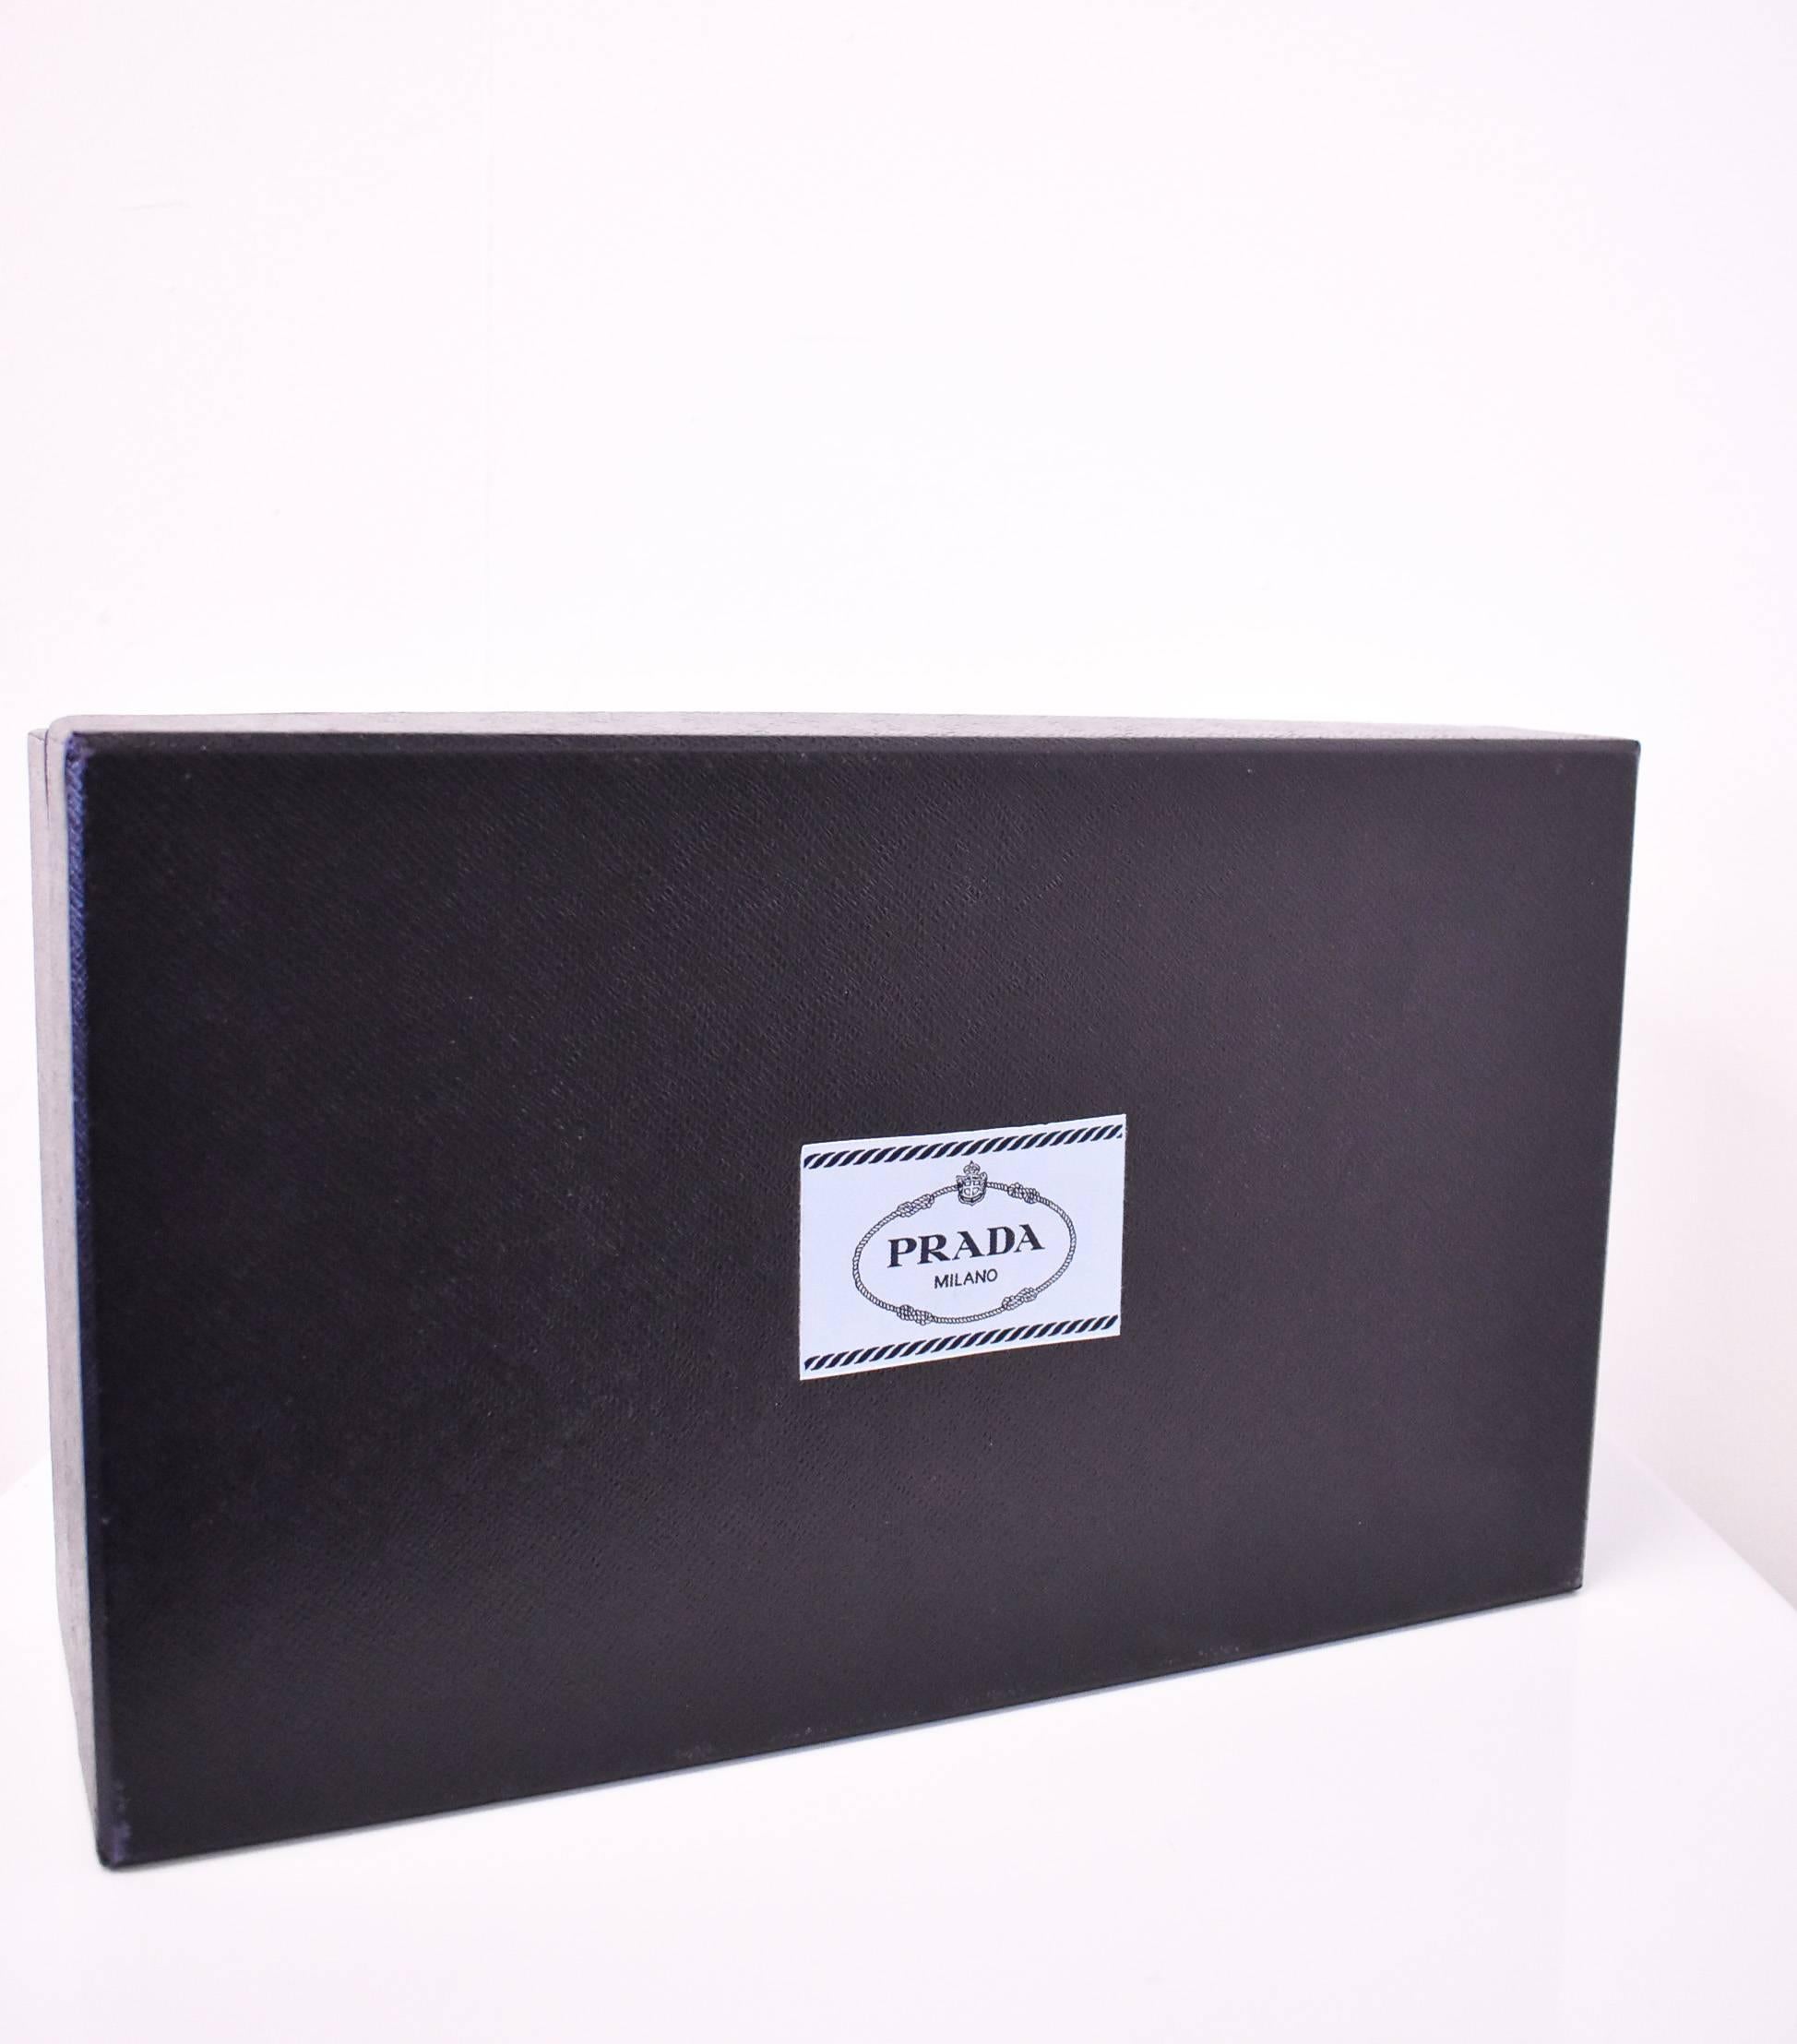 Prada Black Wedge Shoes with Gold Ankle Strap Unworn with Box and Dustbag A/W 14 For Sale 4